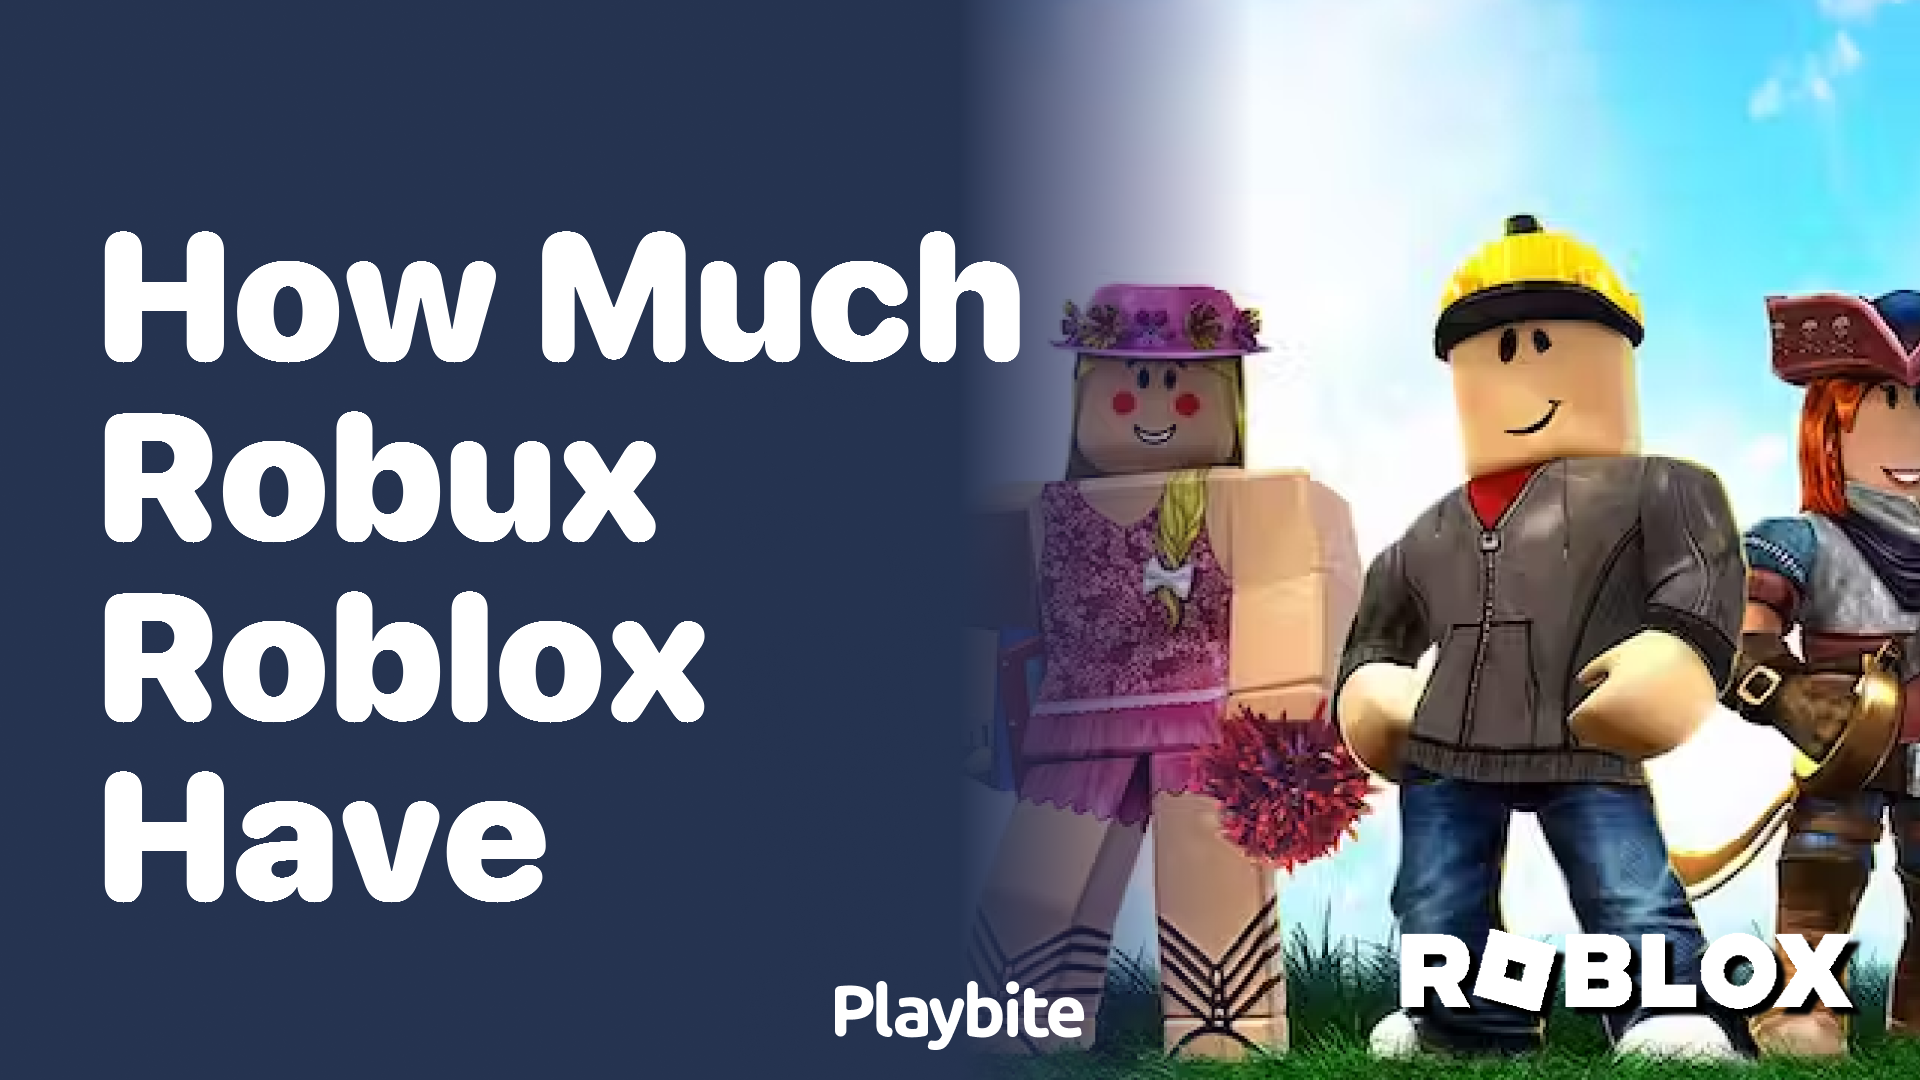 How Much Robux Does Roblox Have?